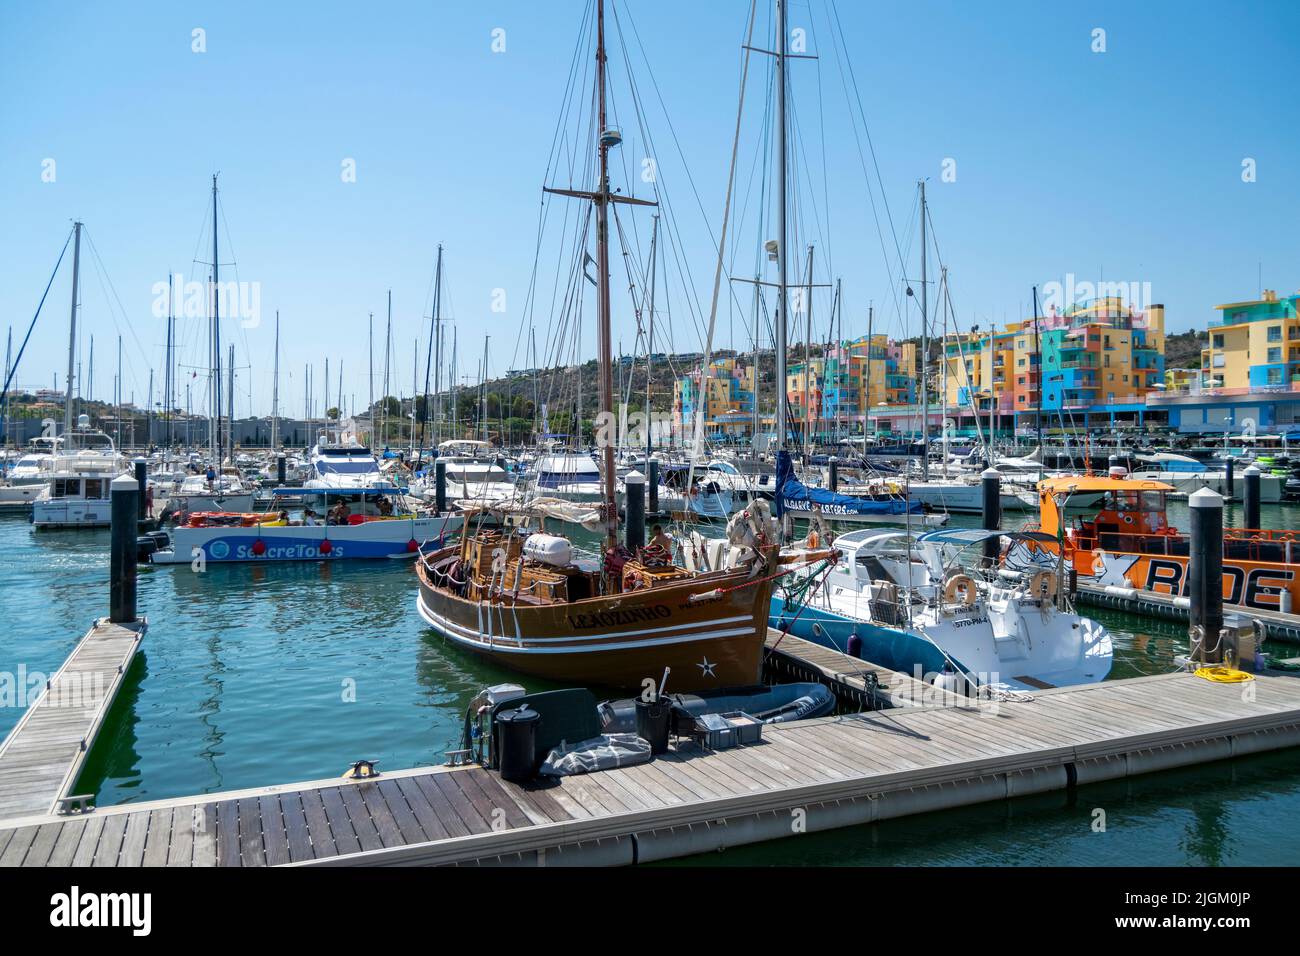 Marina de Albufeira in Algarve South Portugal. Boats parked. Boats on water. Nautical activities. Portugal and tourism. Stock Photo